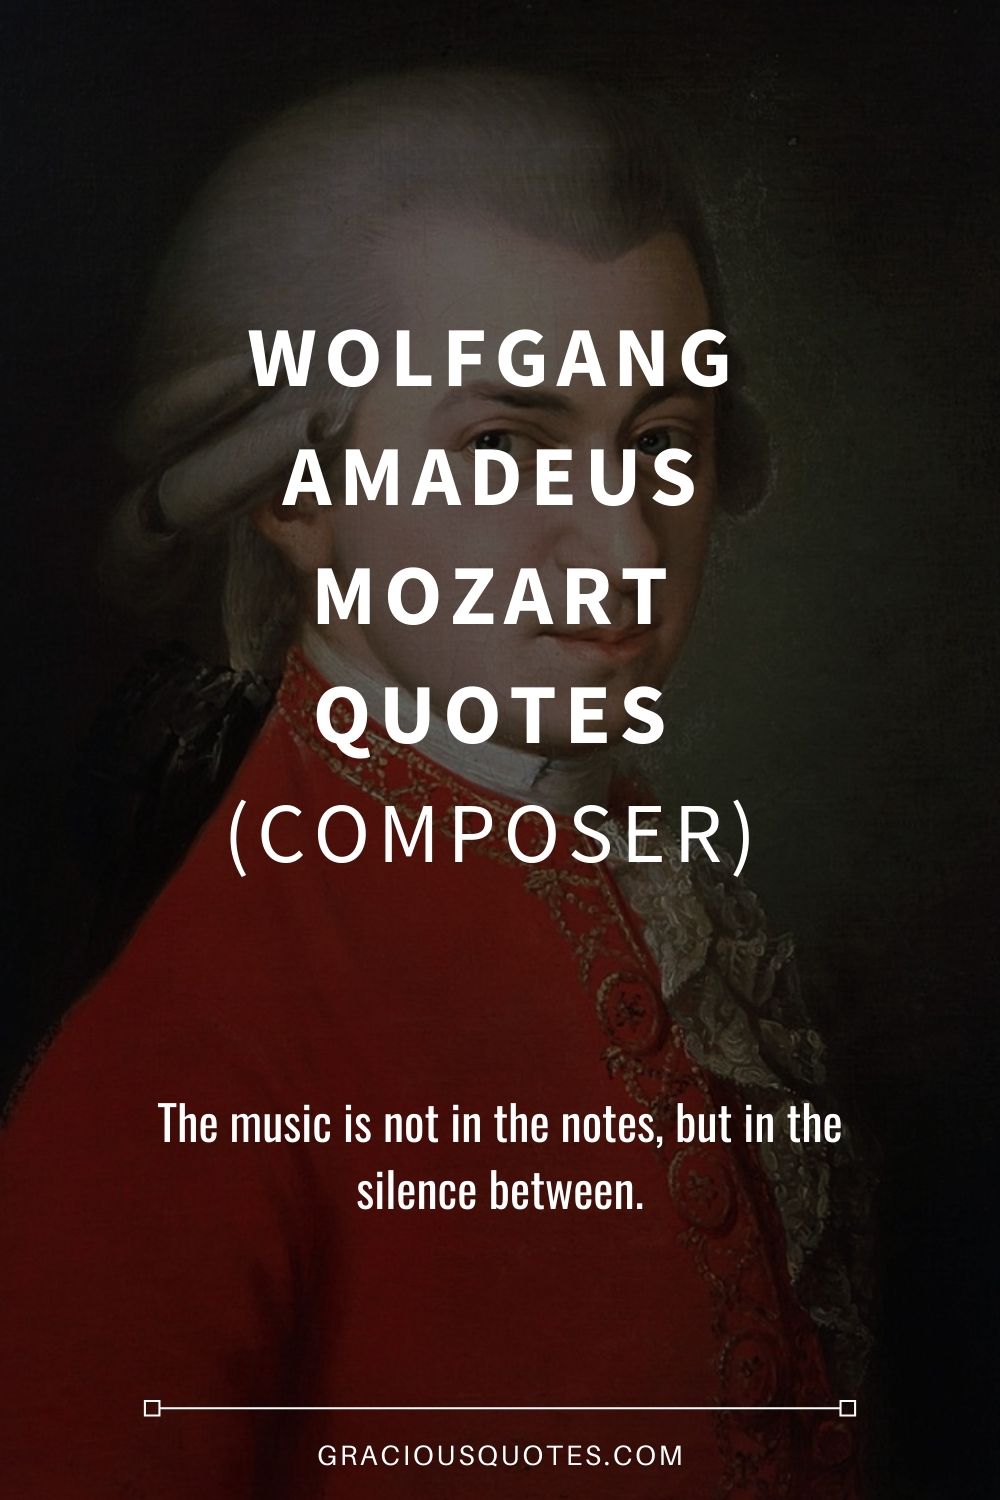 Wolfgang Amadeus Mozart Quotes (COMPOSER) - Gracious Quotes